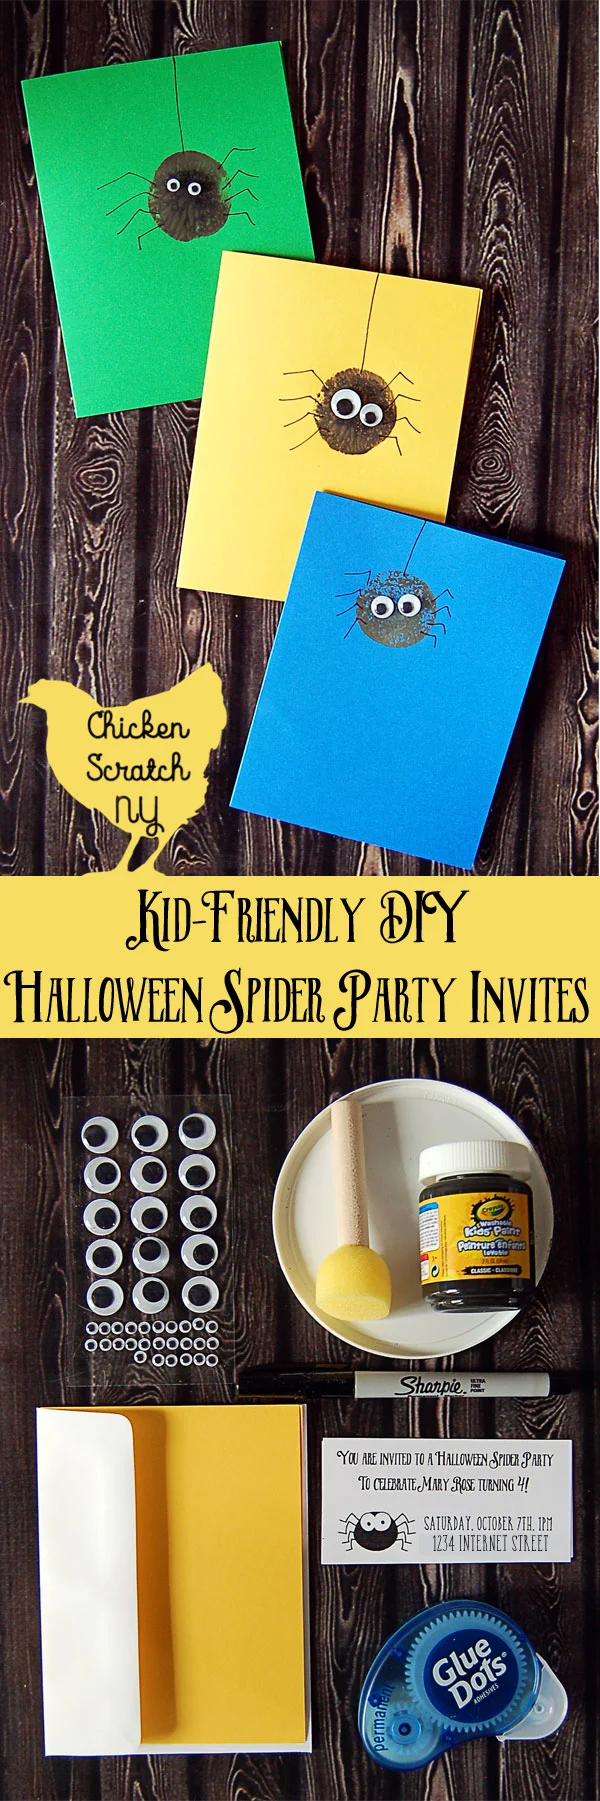 Halloween Party, Kid-friendly, spider party, party invitation, DIY